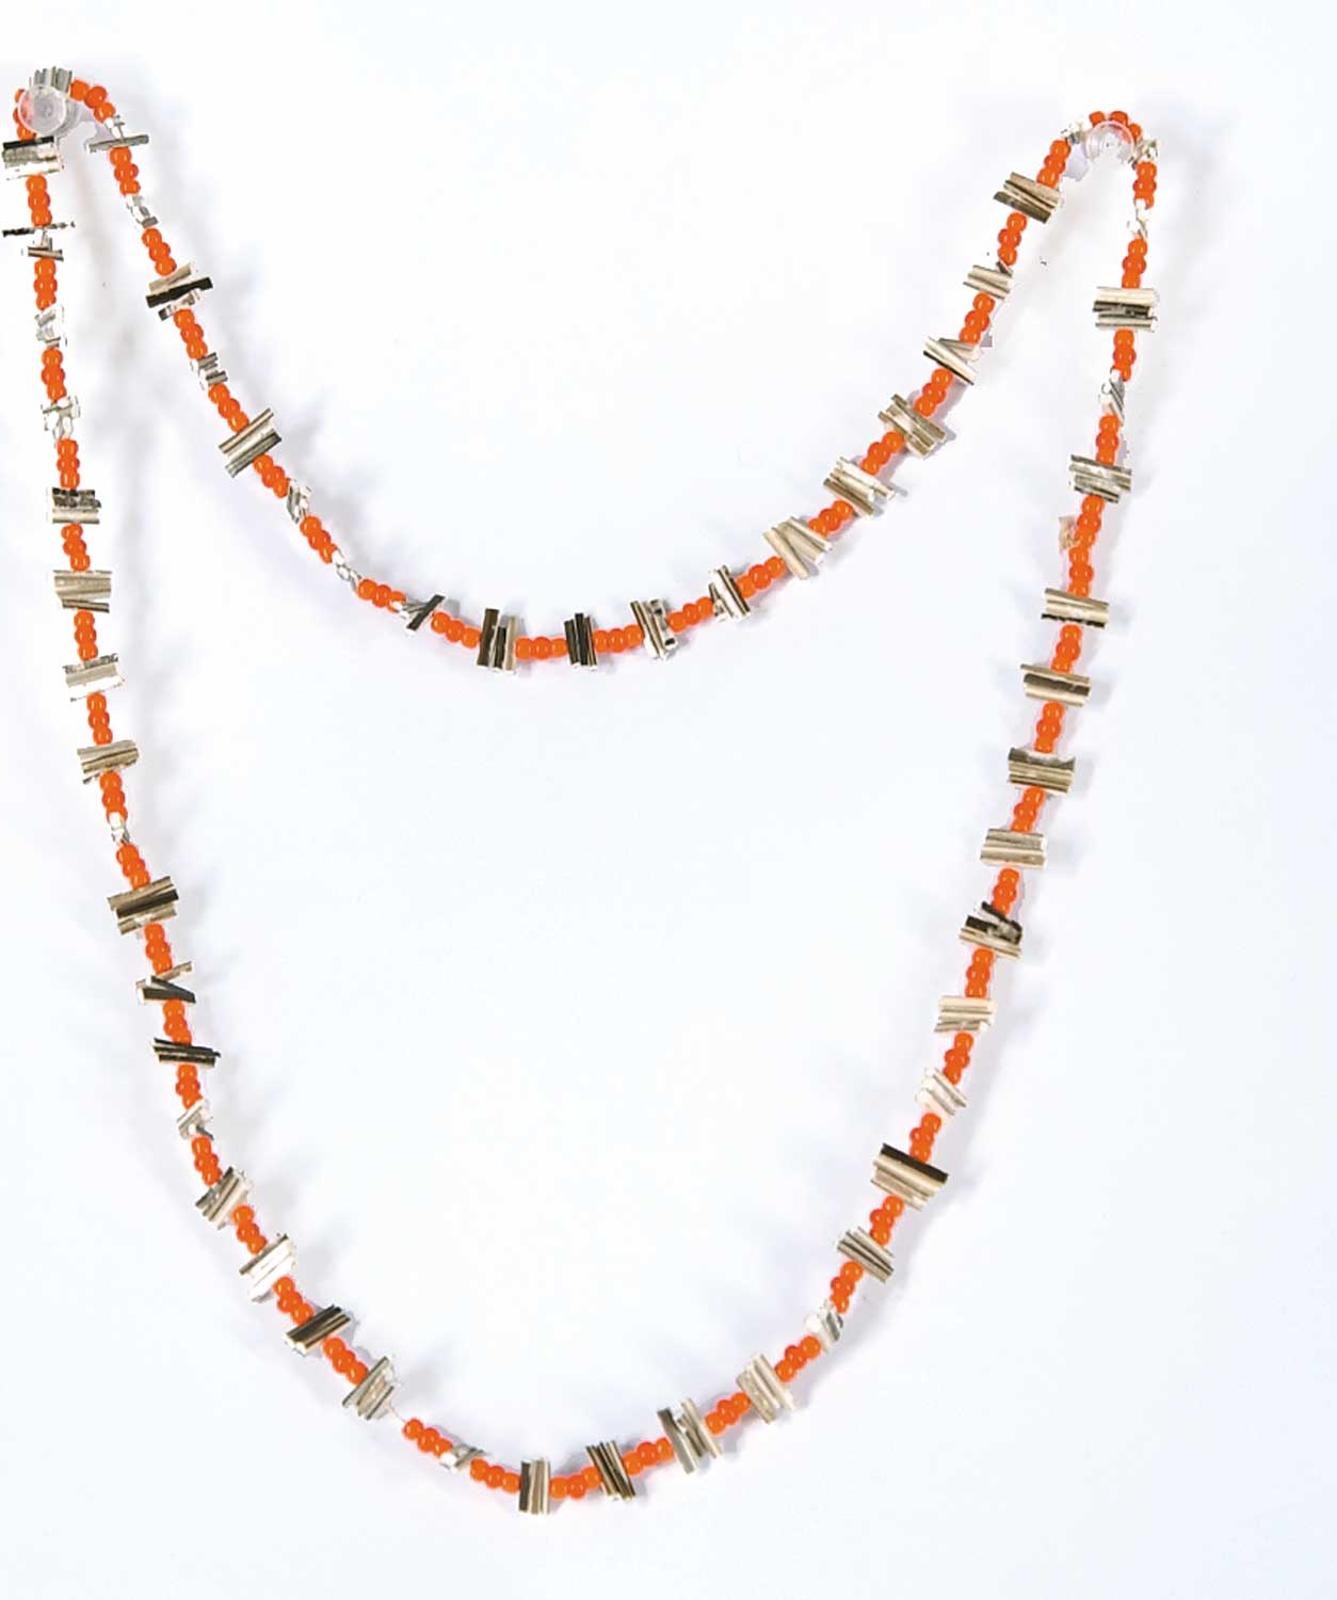 Robert Charles Aller (1922-2008) - Untitled - Orange Beads and Porcupine Quill Necklace